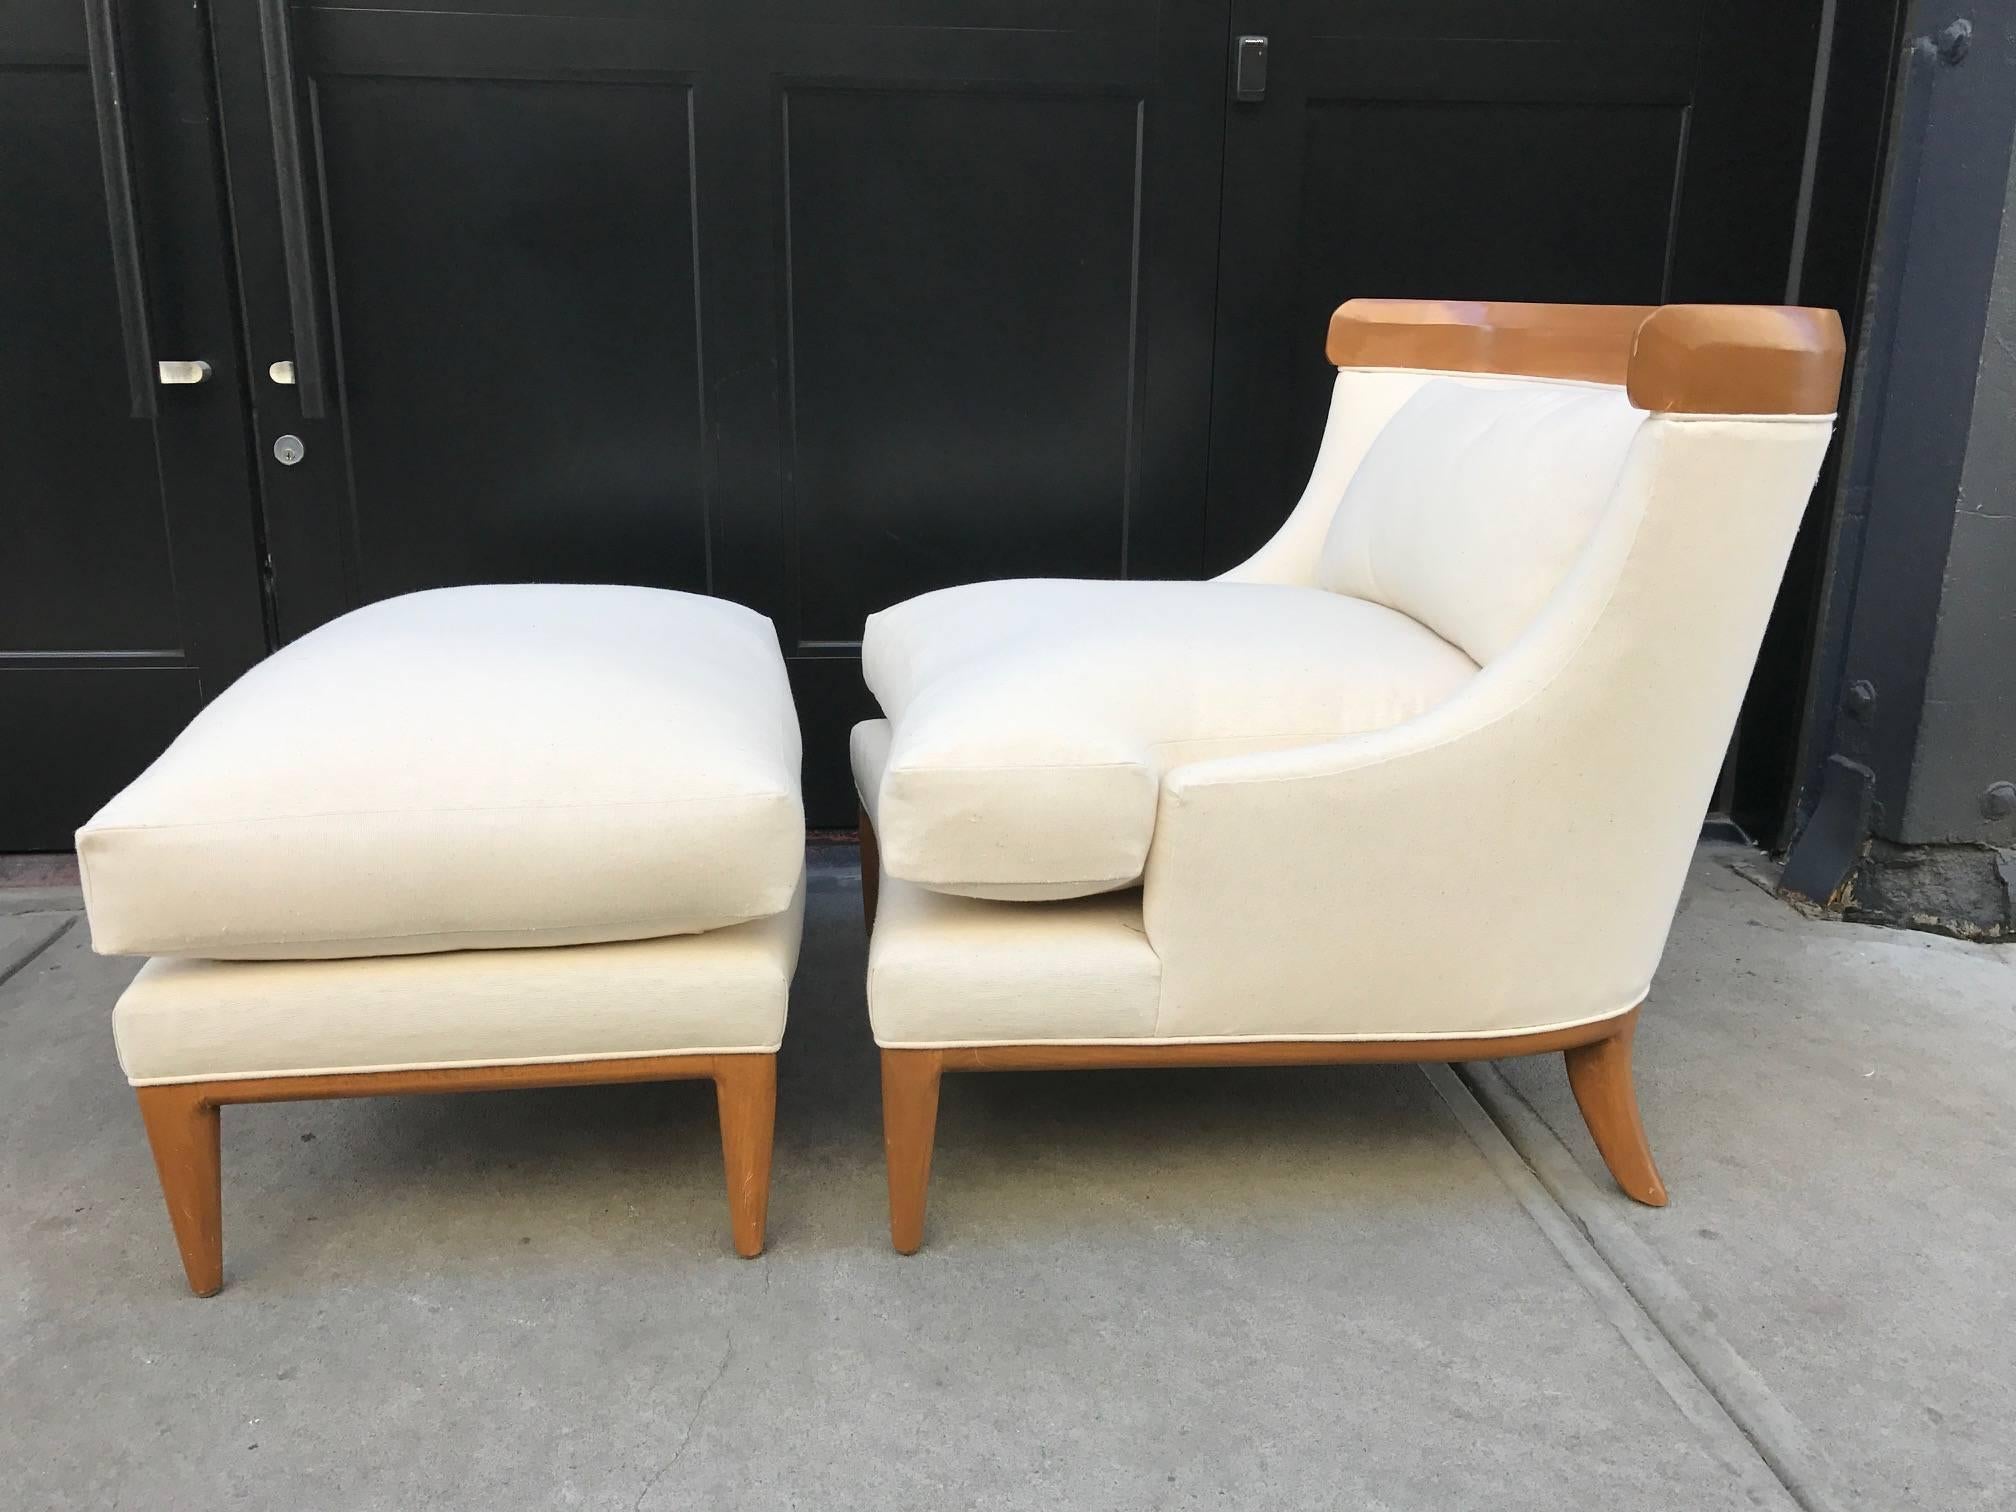 Lounge chair and ottoman by Erwin Lambeth. Sculptured wood frame and newly upholstered.